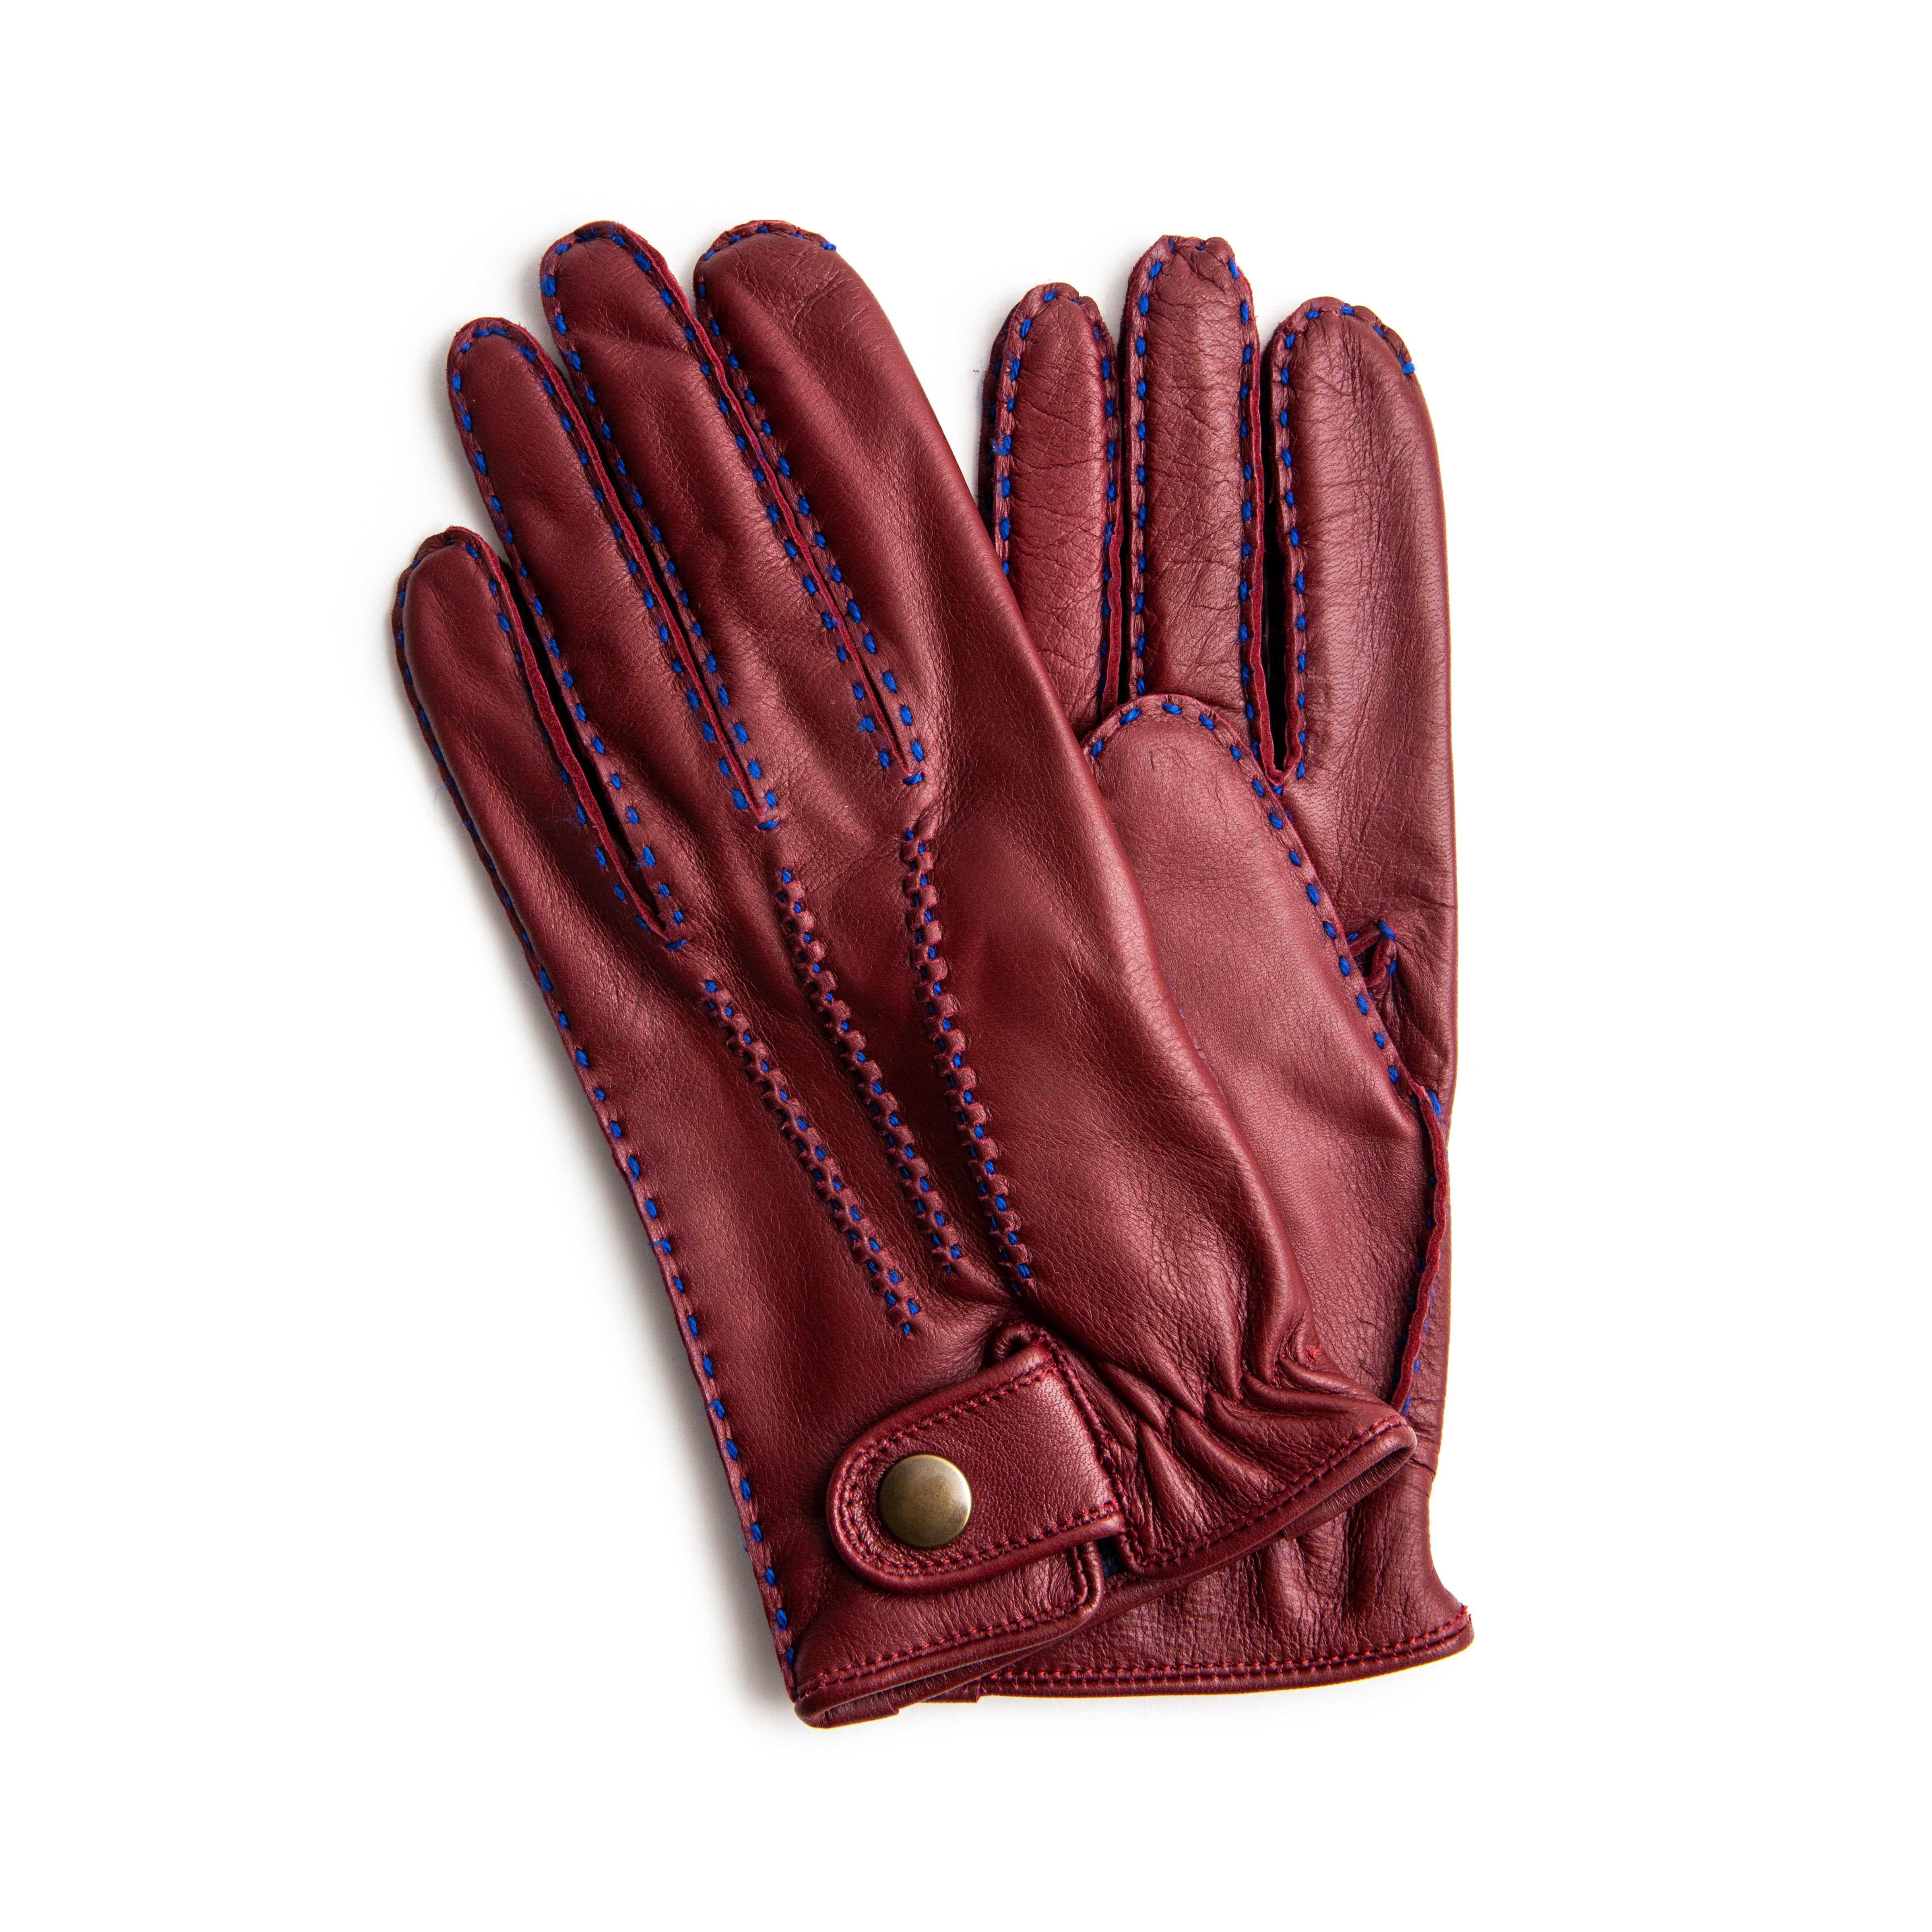 Bordeaux Driving Gloves - Made on Request - 9.0